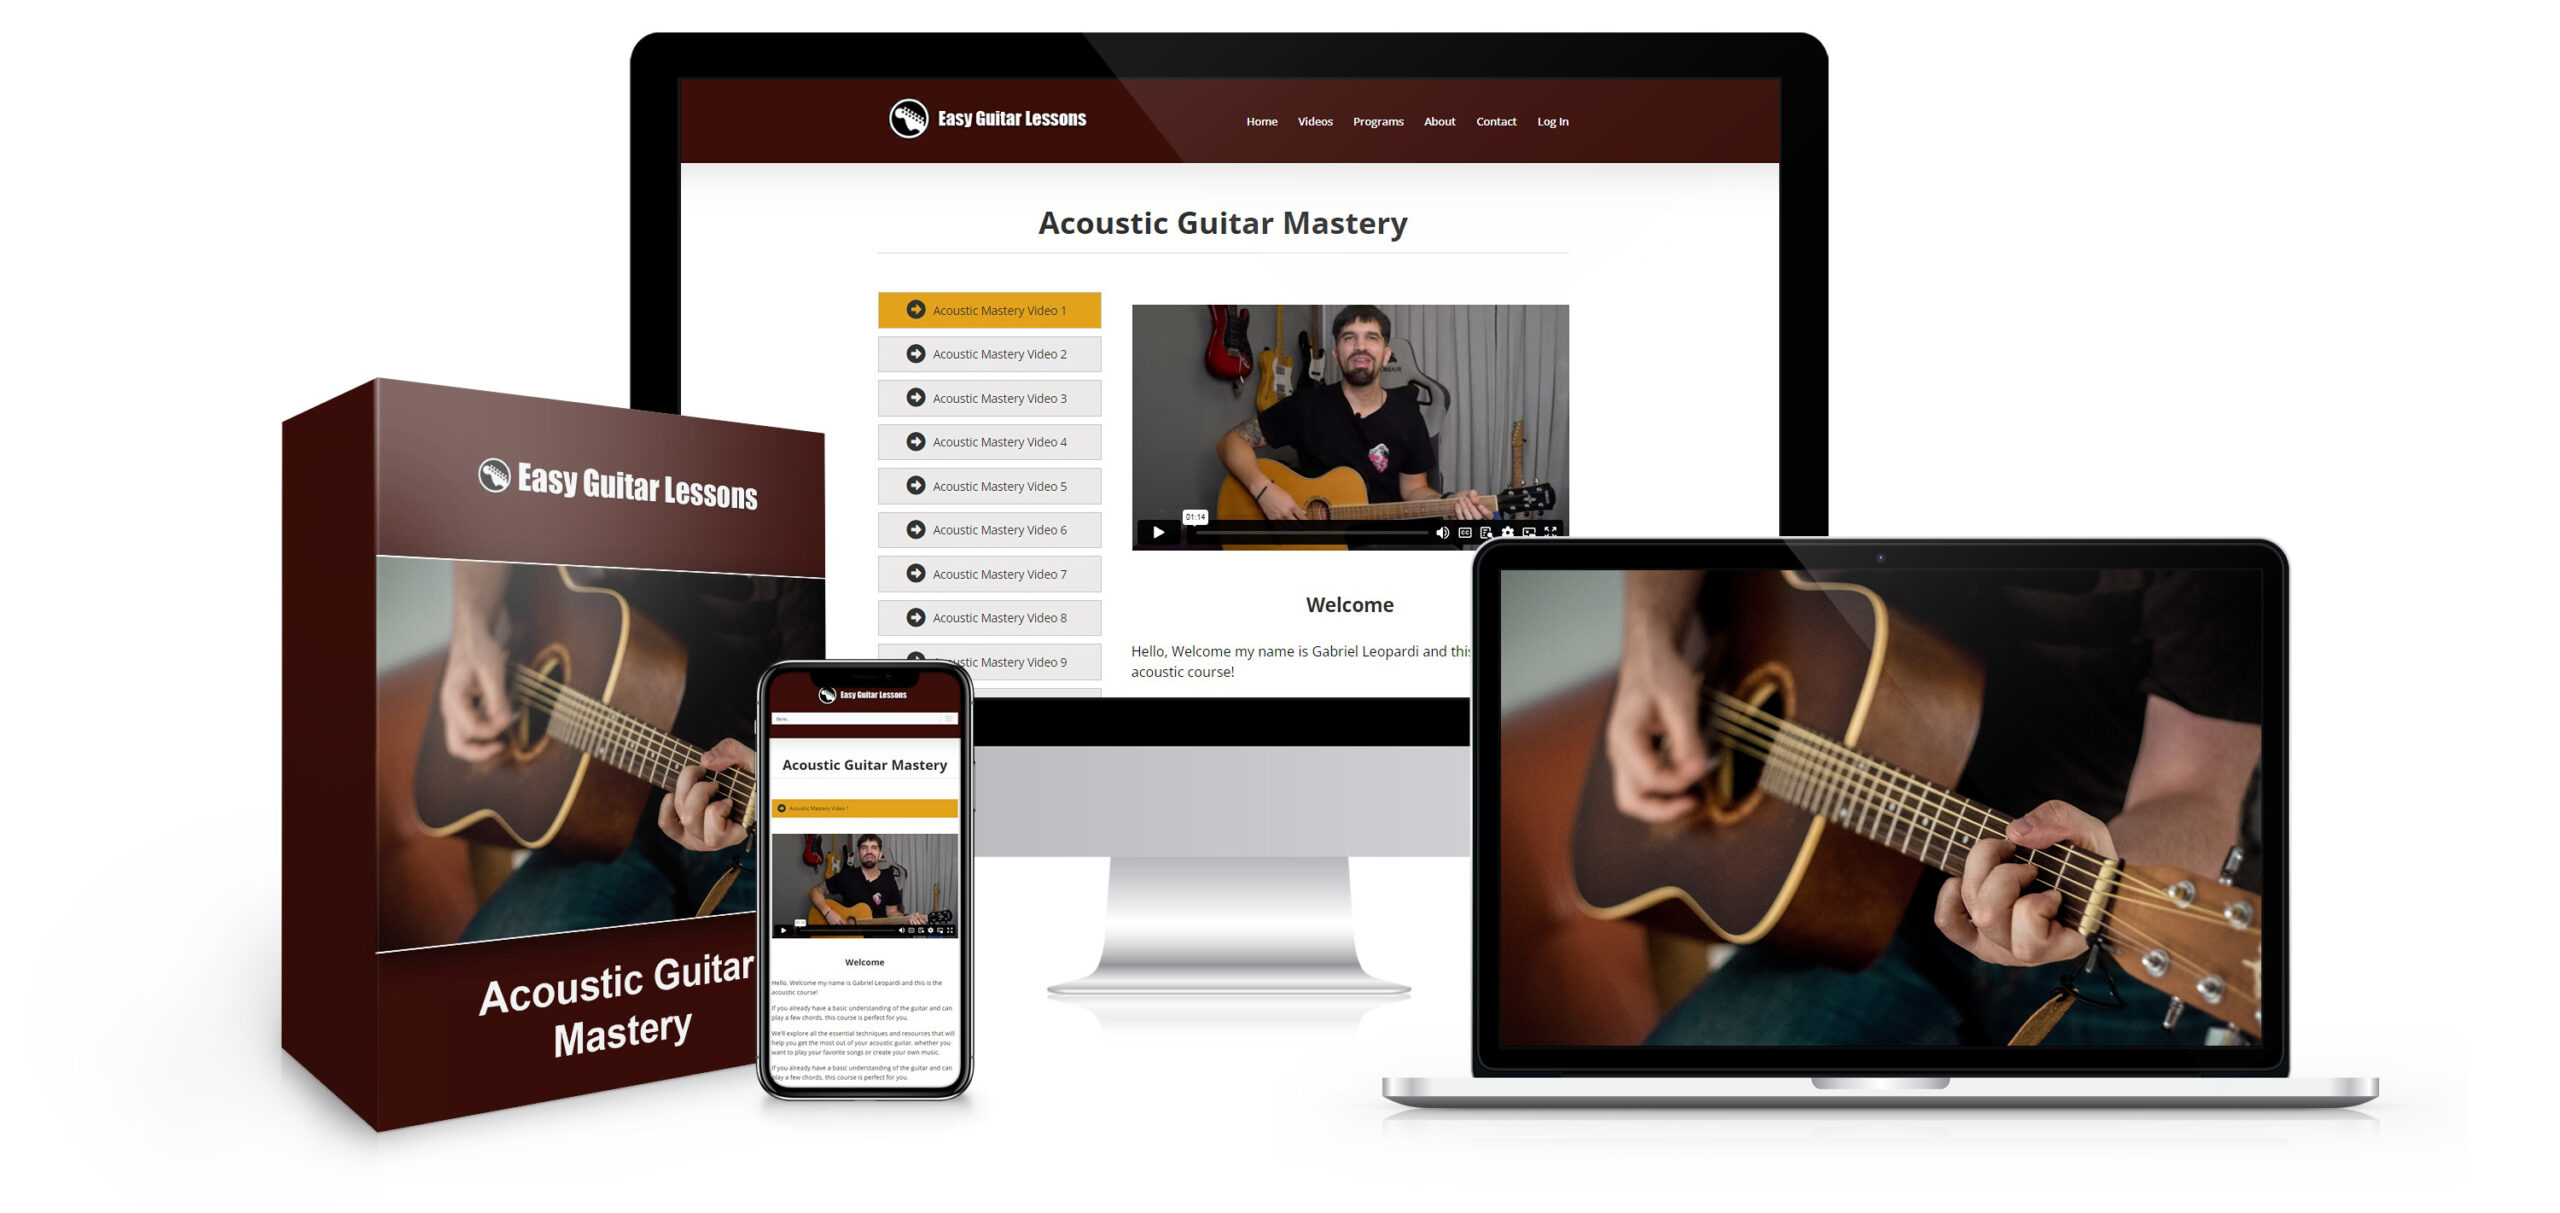 Acoustic Guitar Mastery